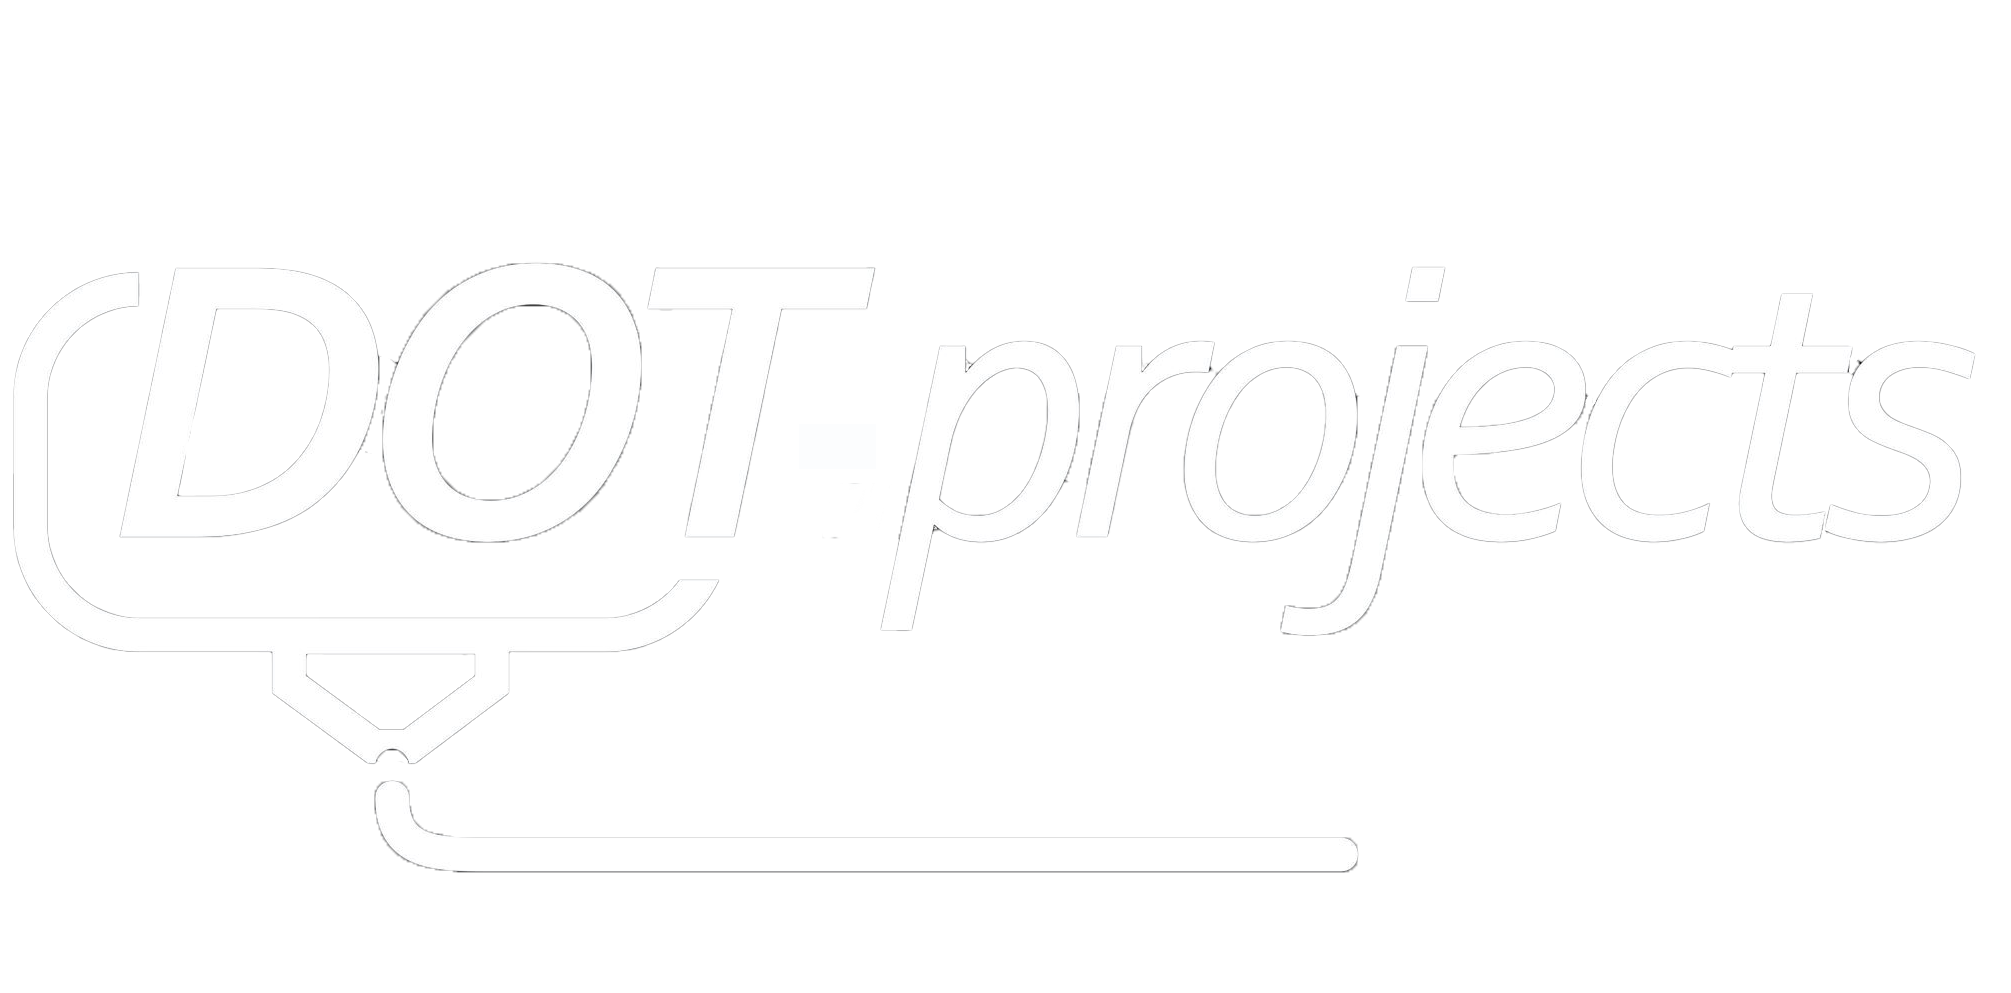 DOT-projects